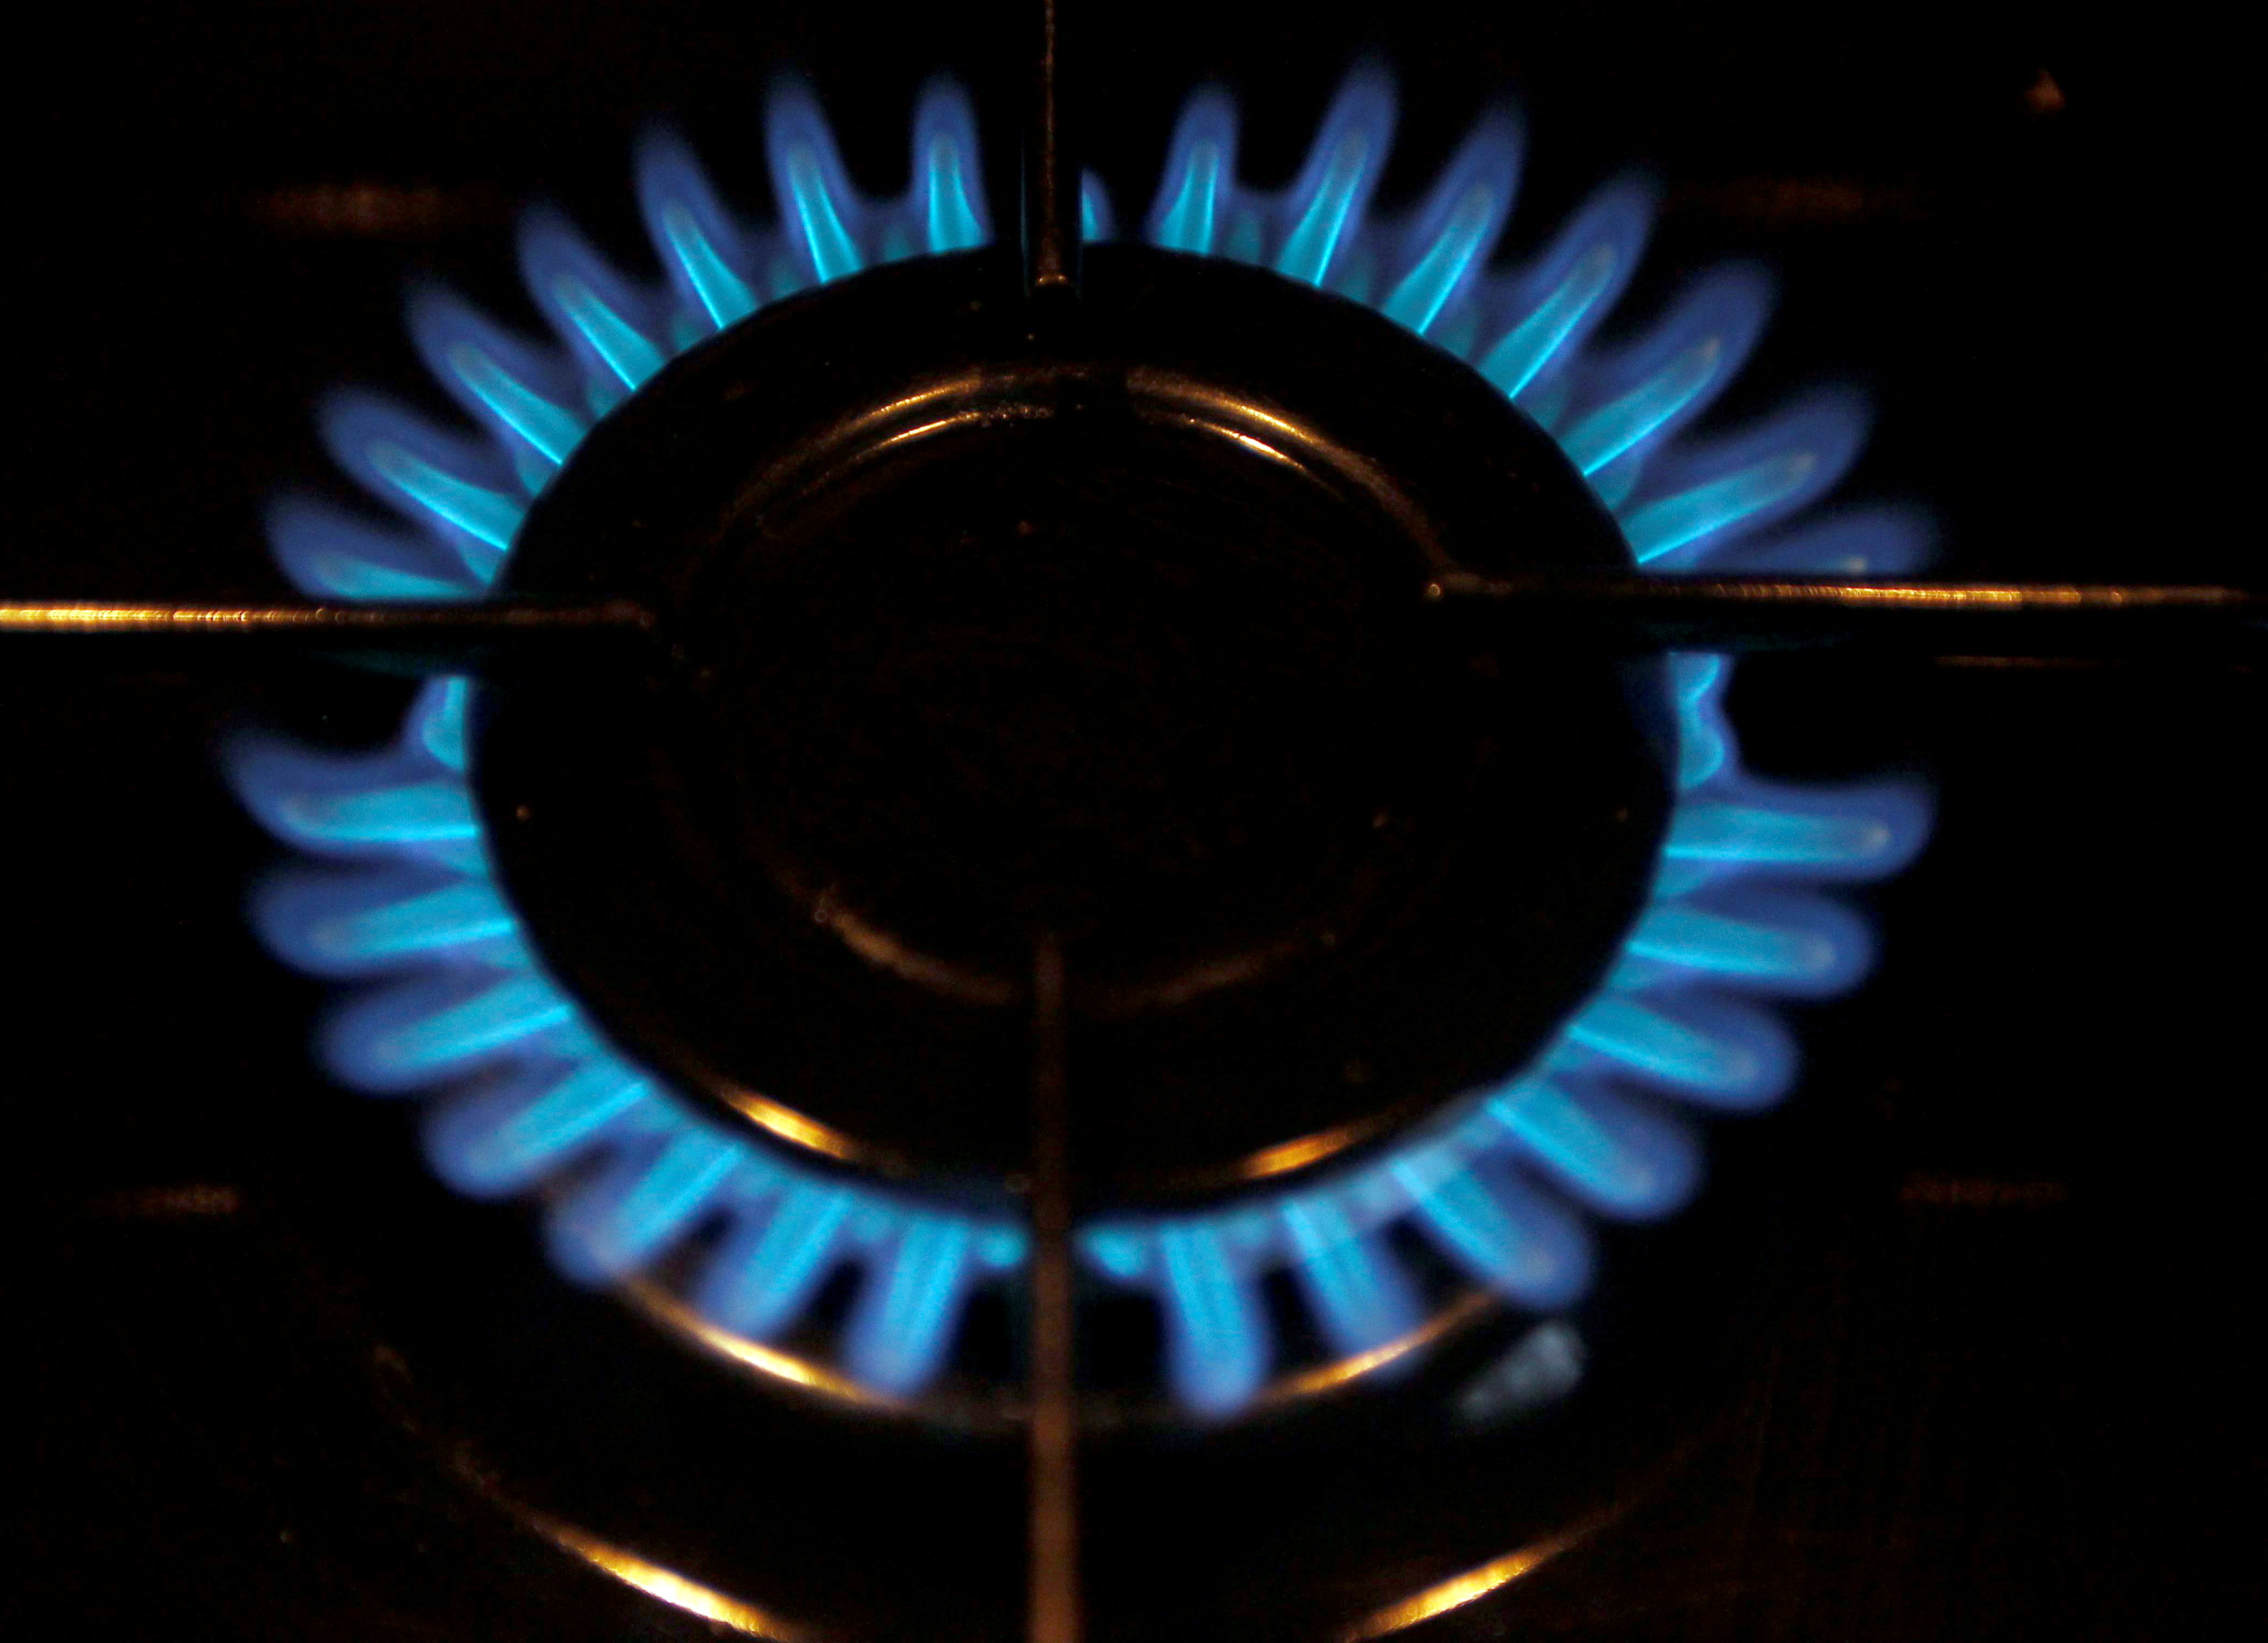 A gas burner is pictured on a cooker in a private home